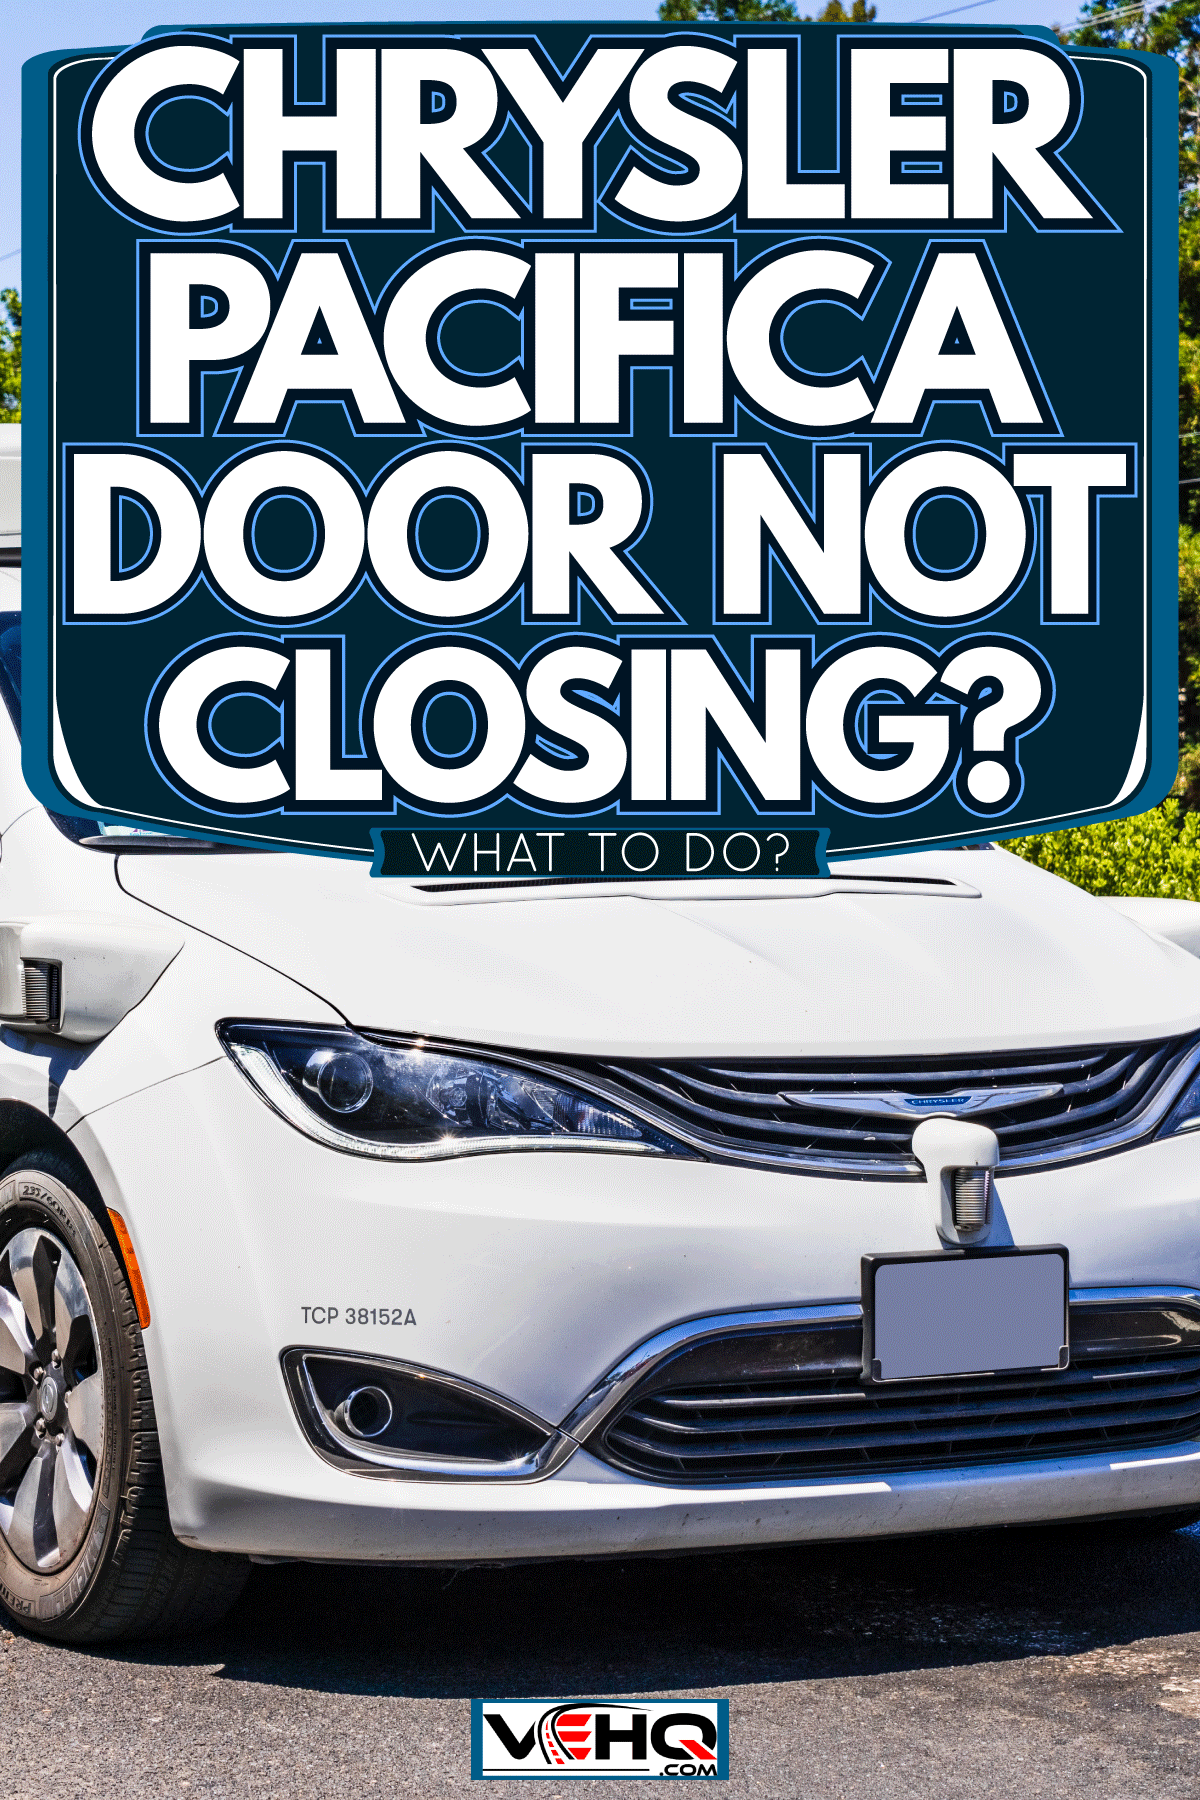 A white Chrysler Pacifica moving down the road, Chrysler Pacifica Door Not Closing - What To Do?